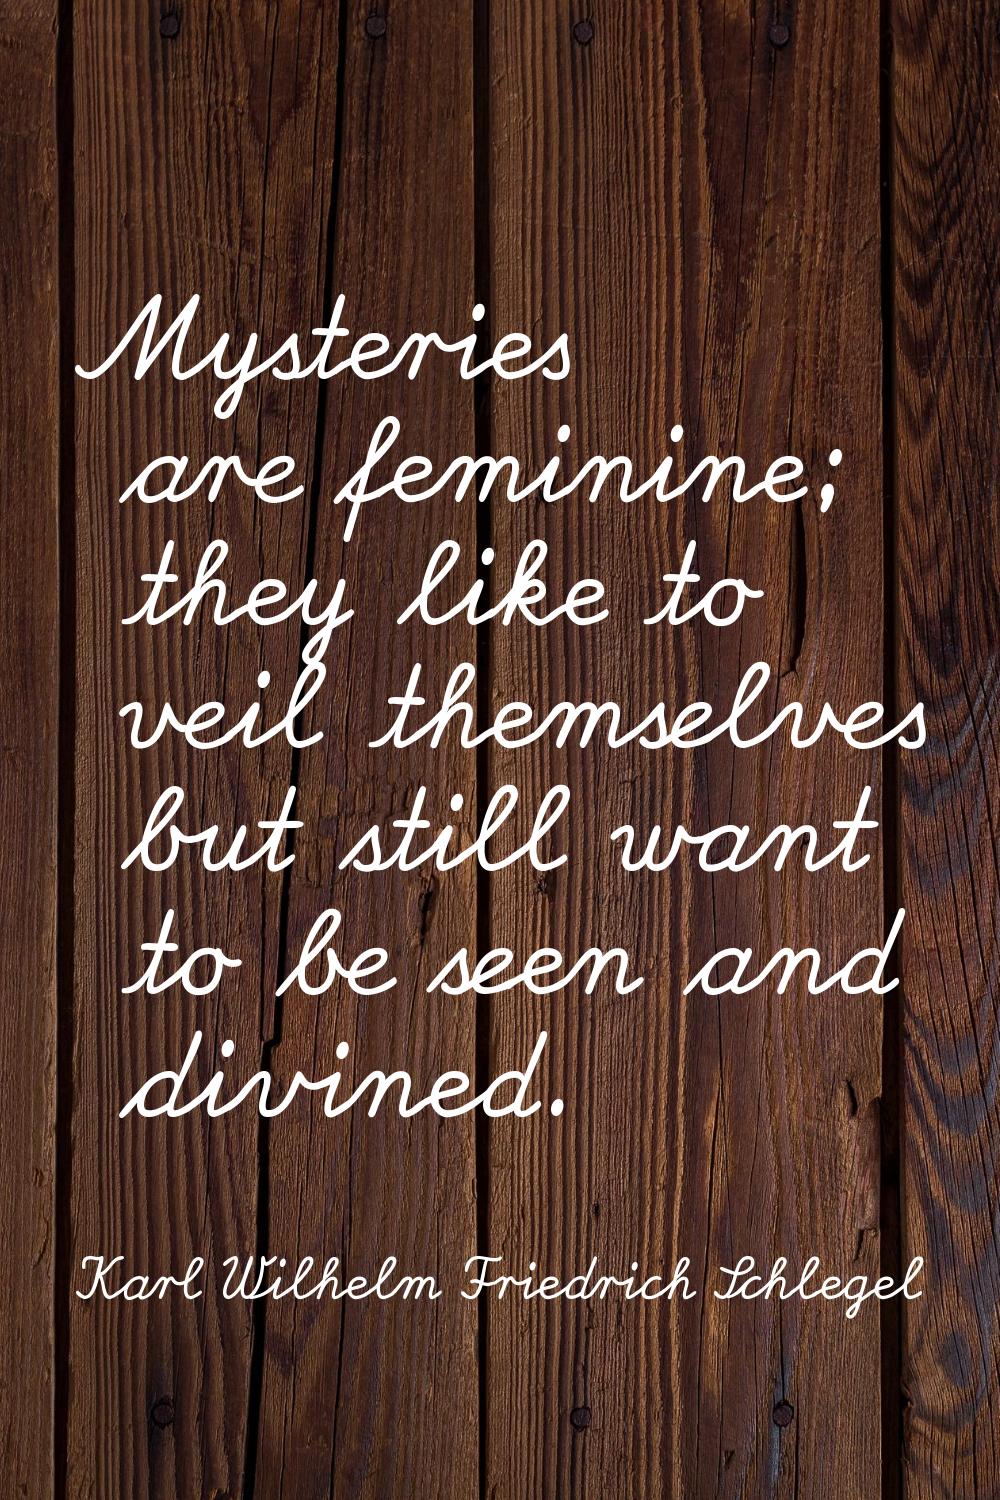 Mysteries are feminine; they like to veil themselves but still want to be seen and divined.